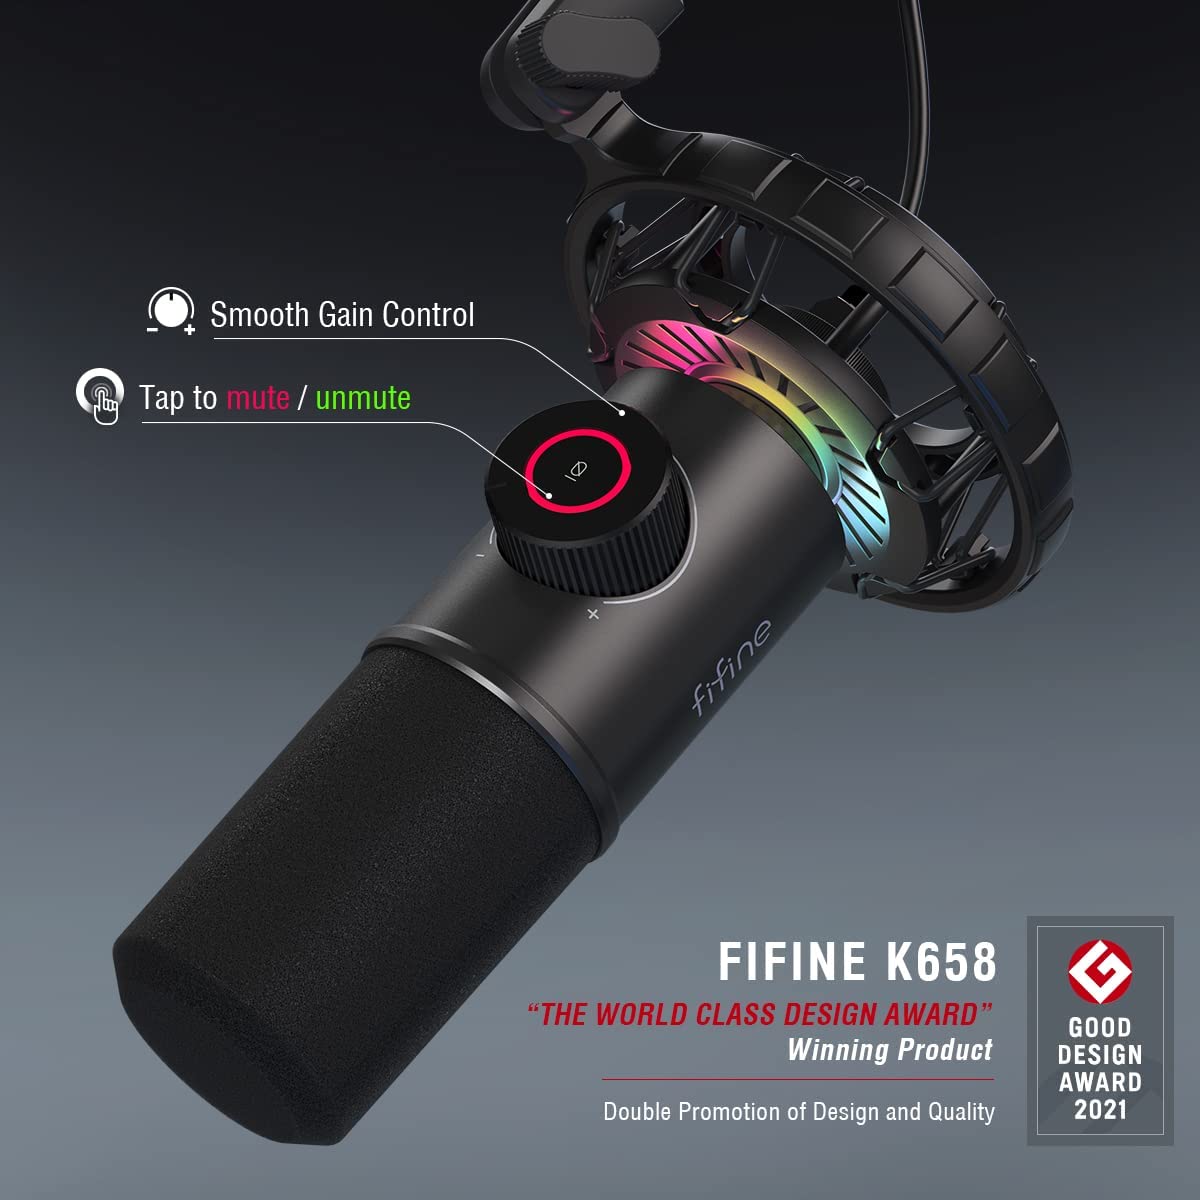 Fifine USB Gaming Microphone K658